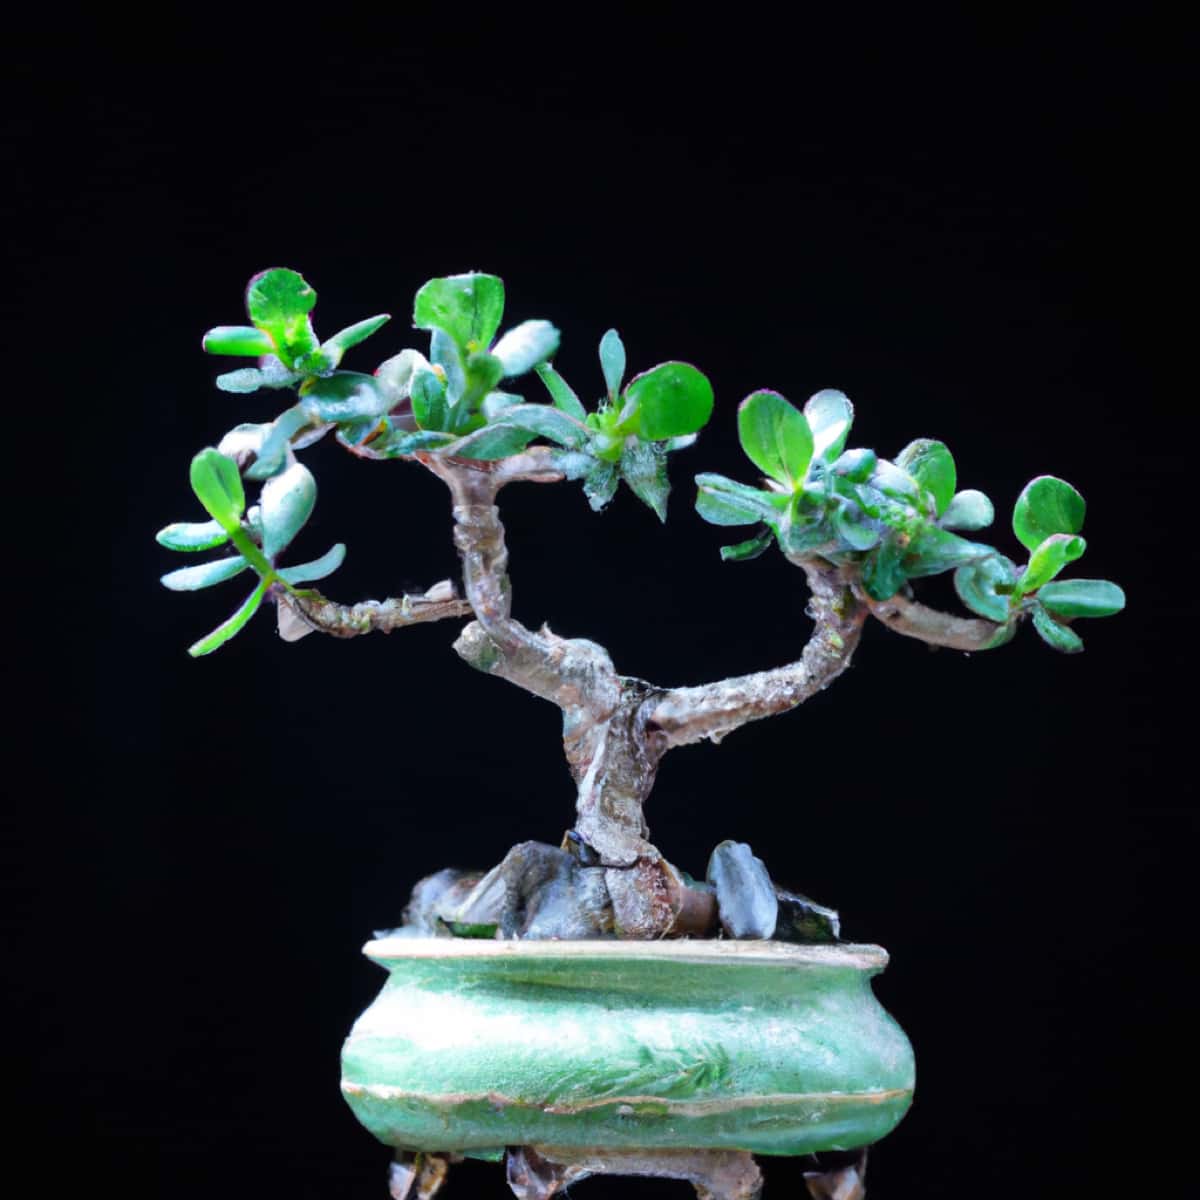 How to Grow and Care for Jade Bonsai